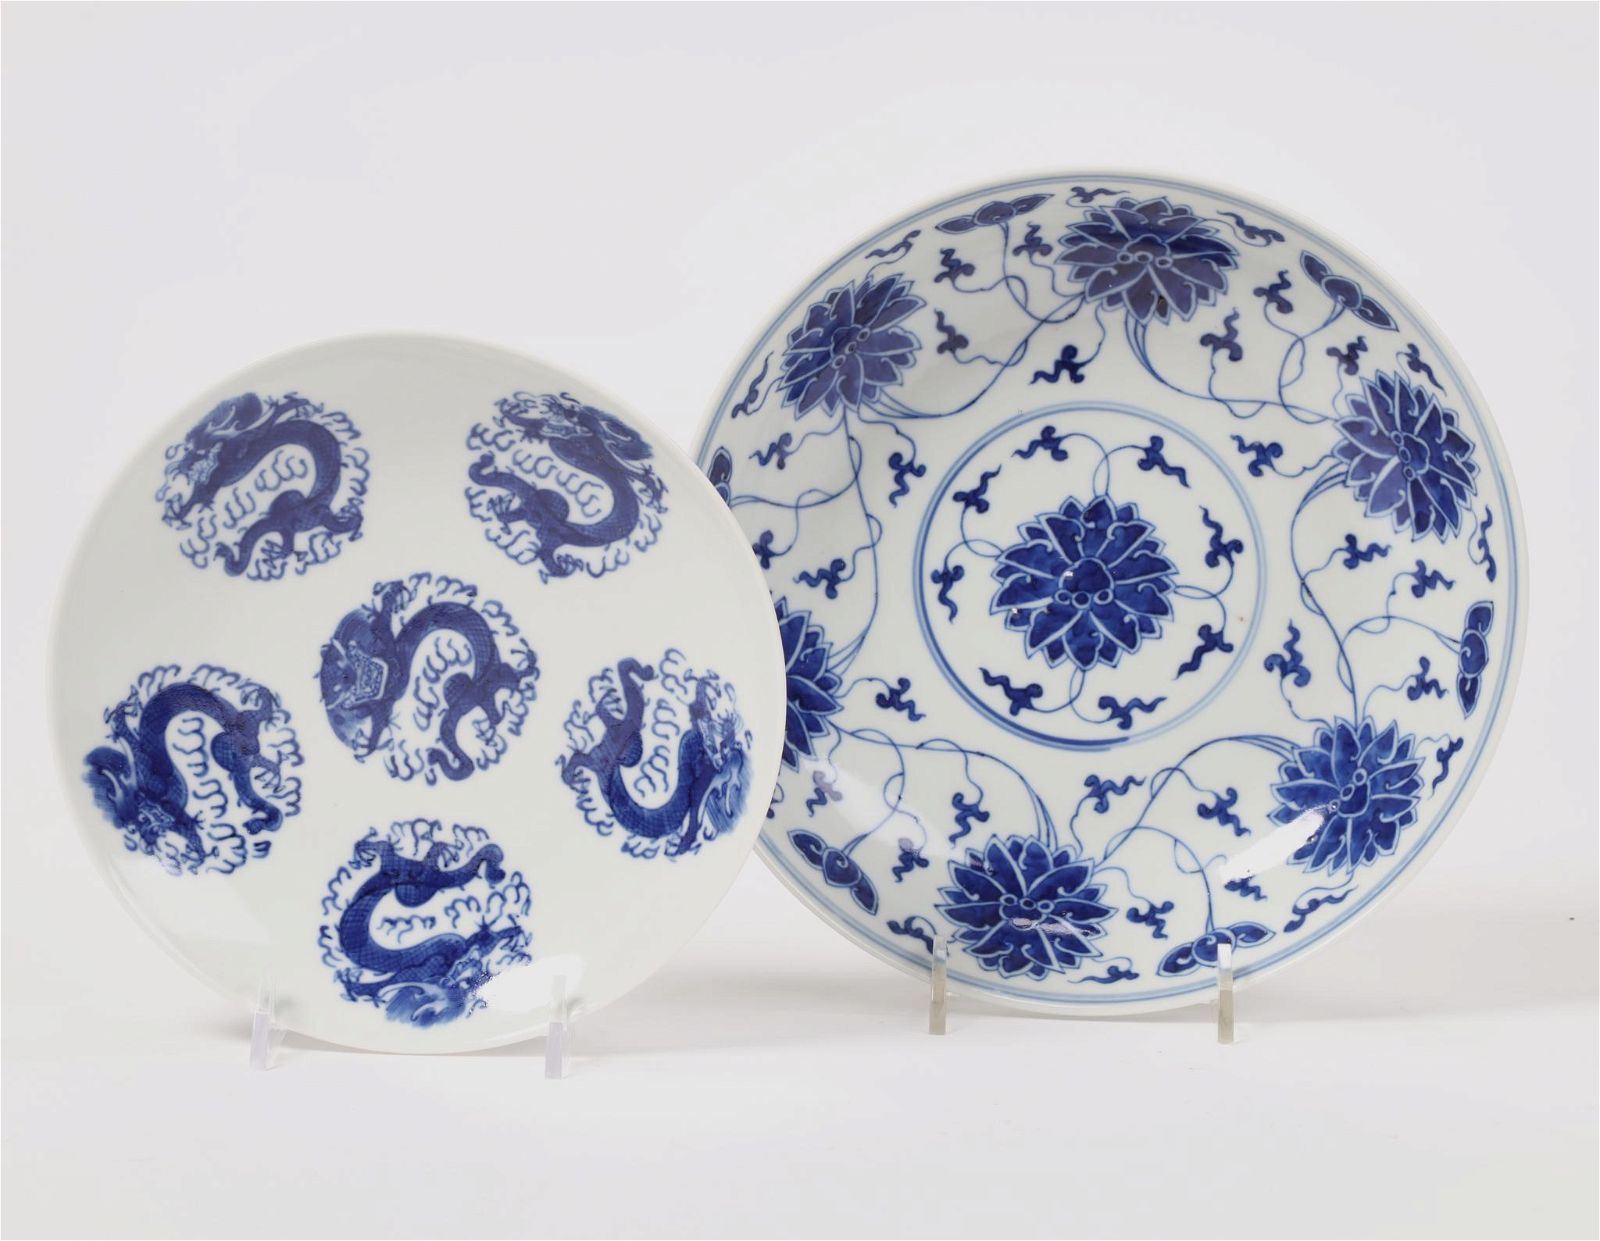 TWO CHINESE BLUE AND WHITE PORCELAIN 2fb29f8